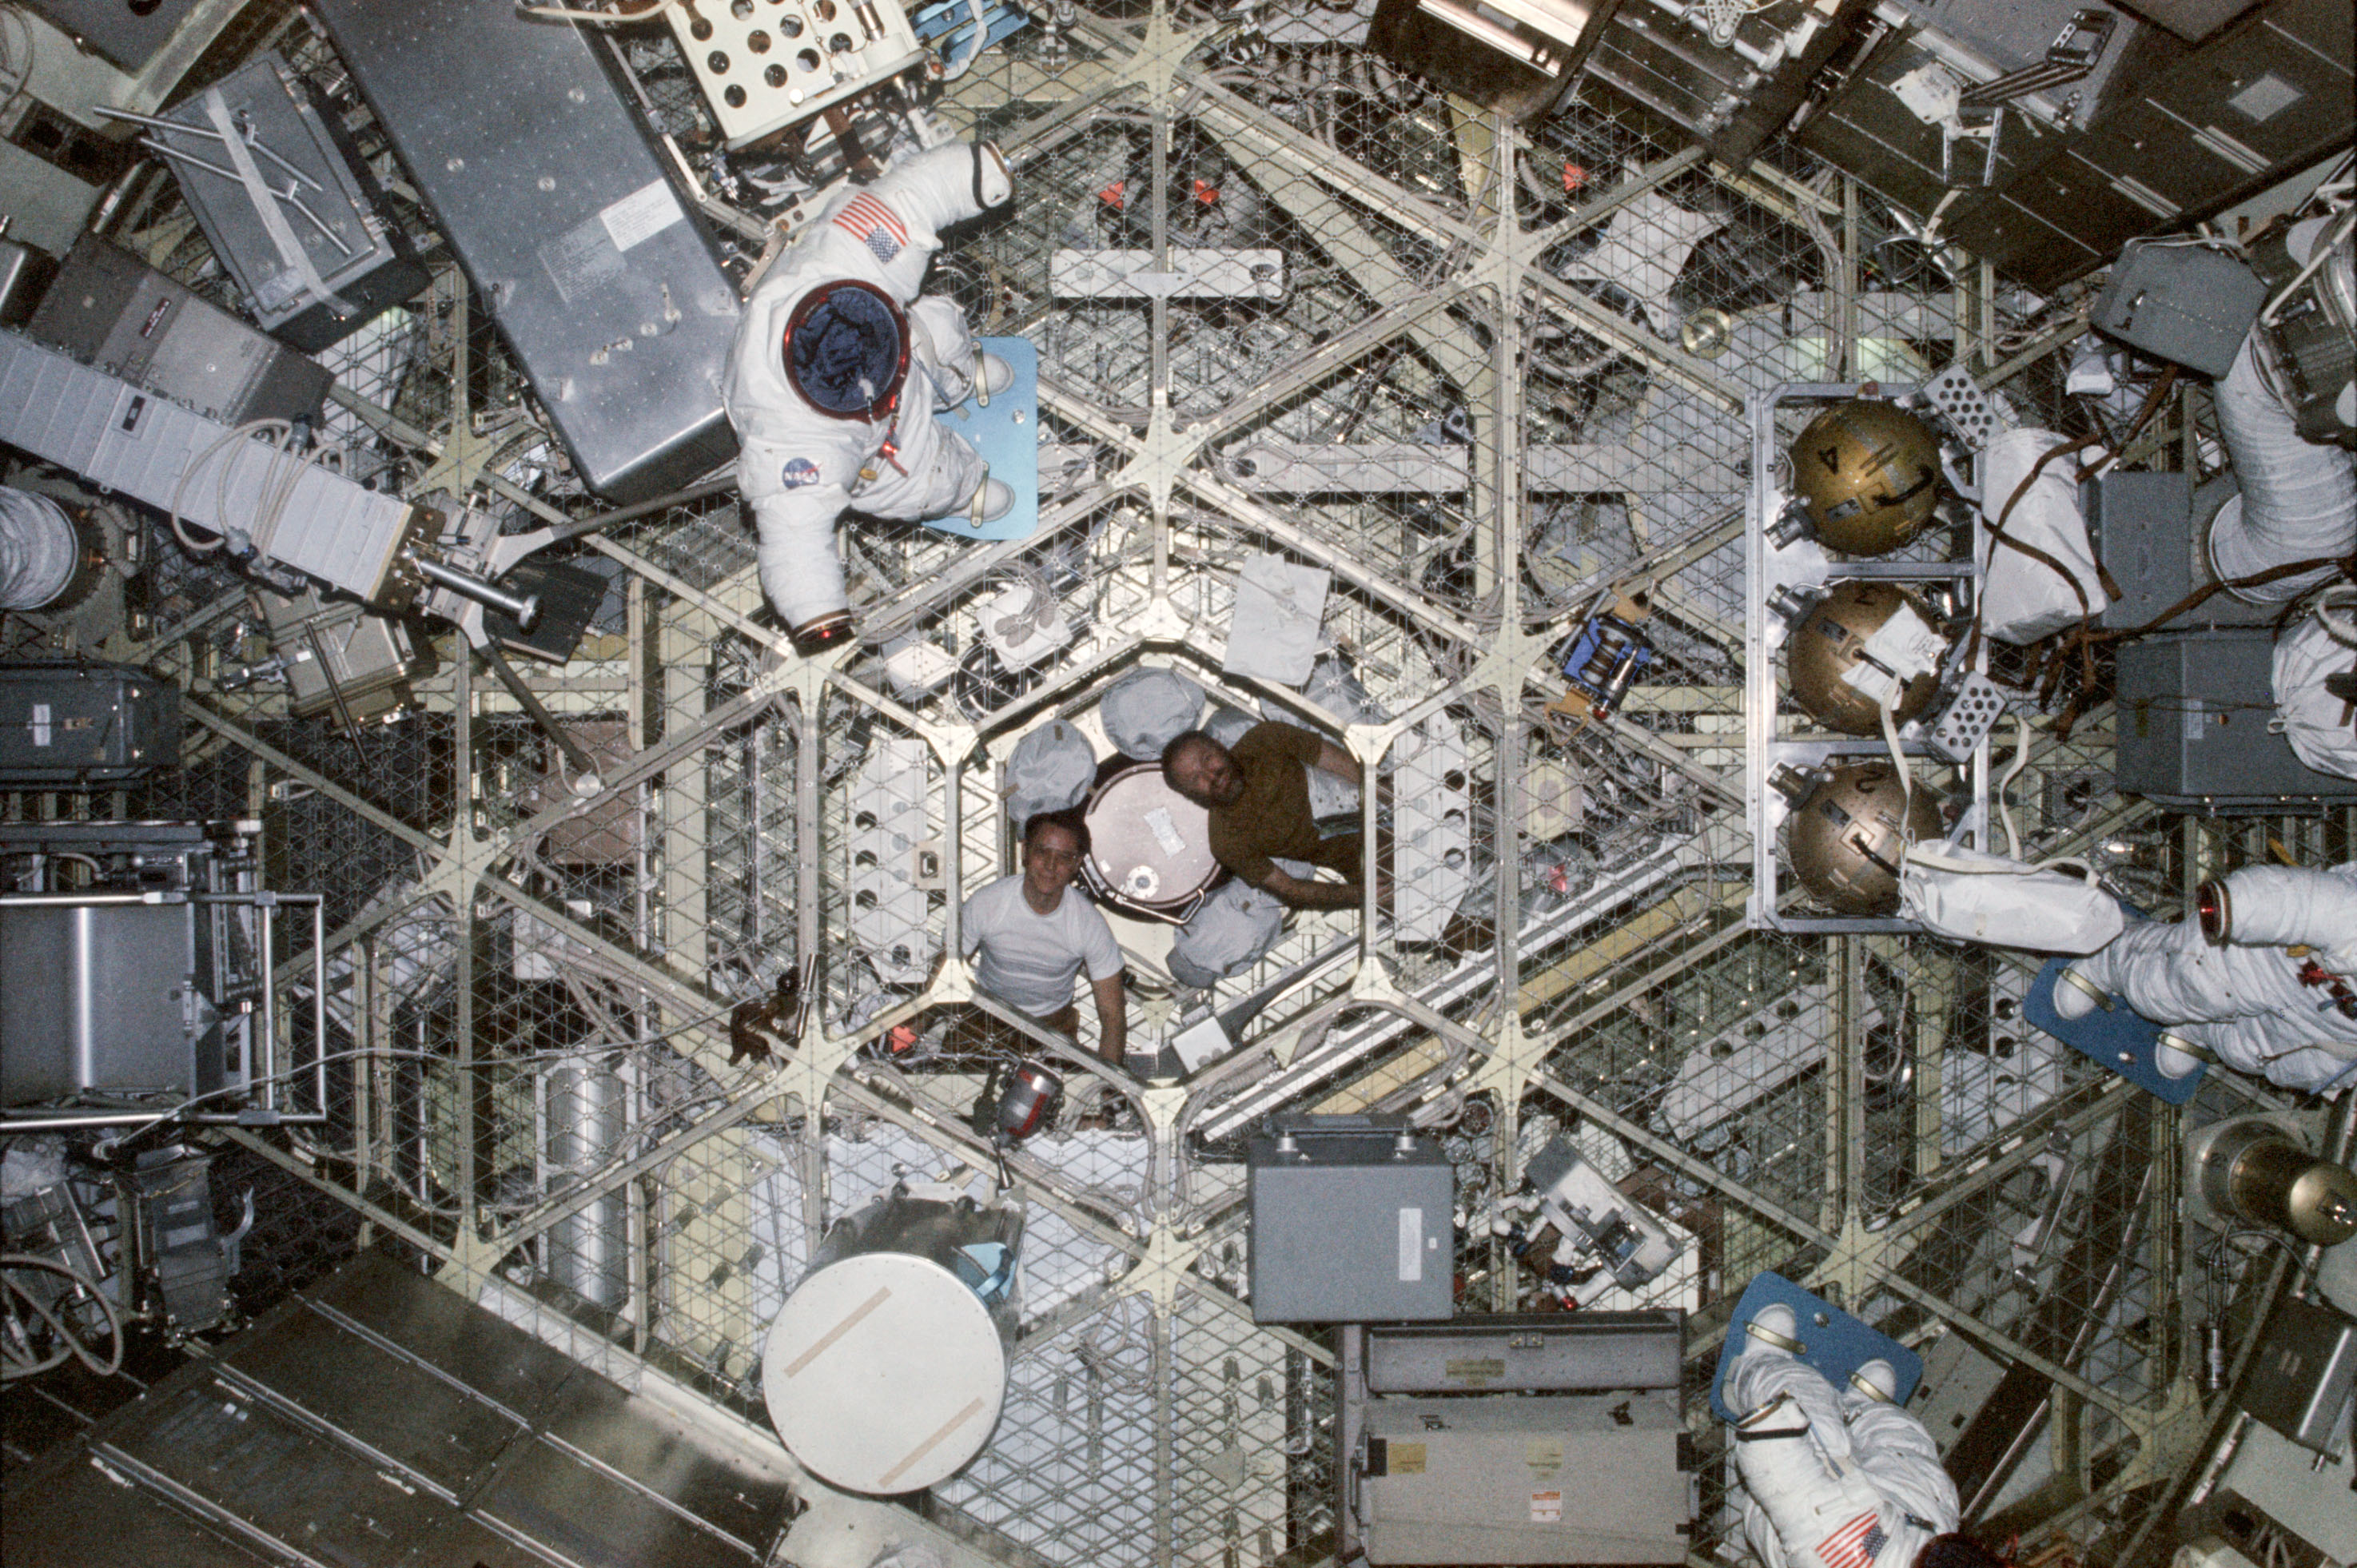 Overall view showing the large volume of the Skylab Orbital Workshop